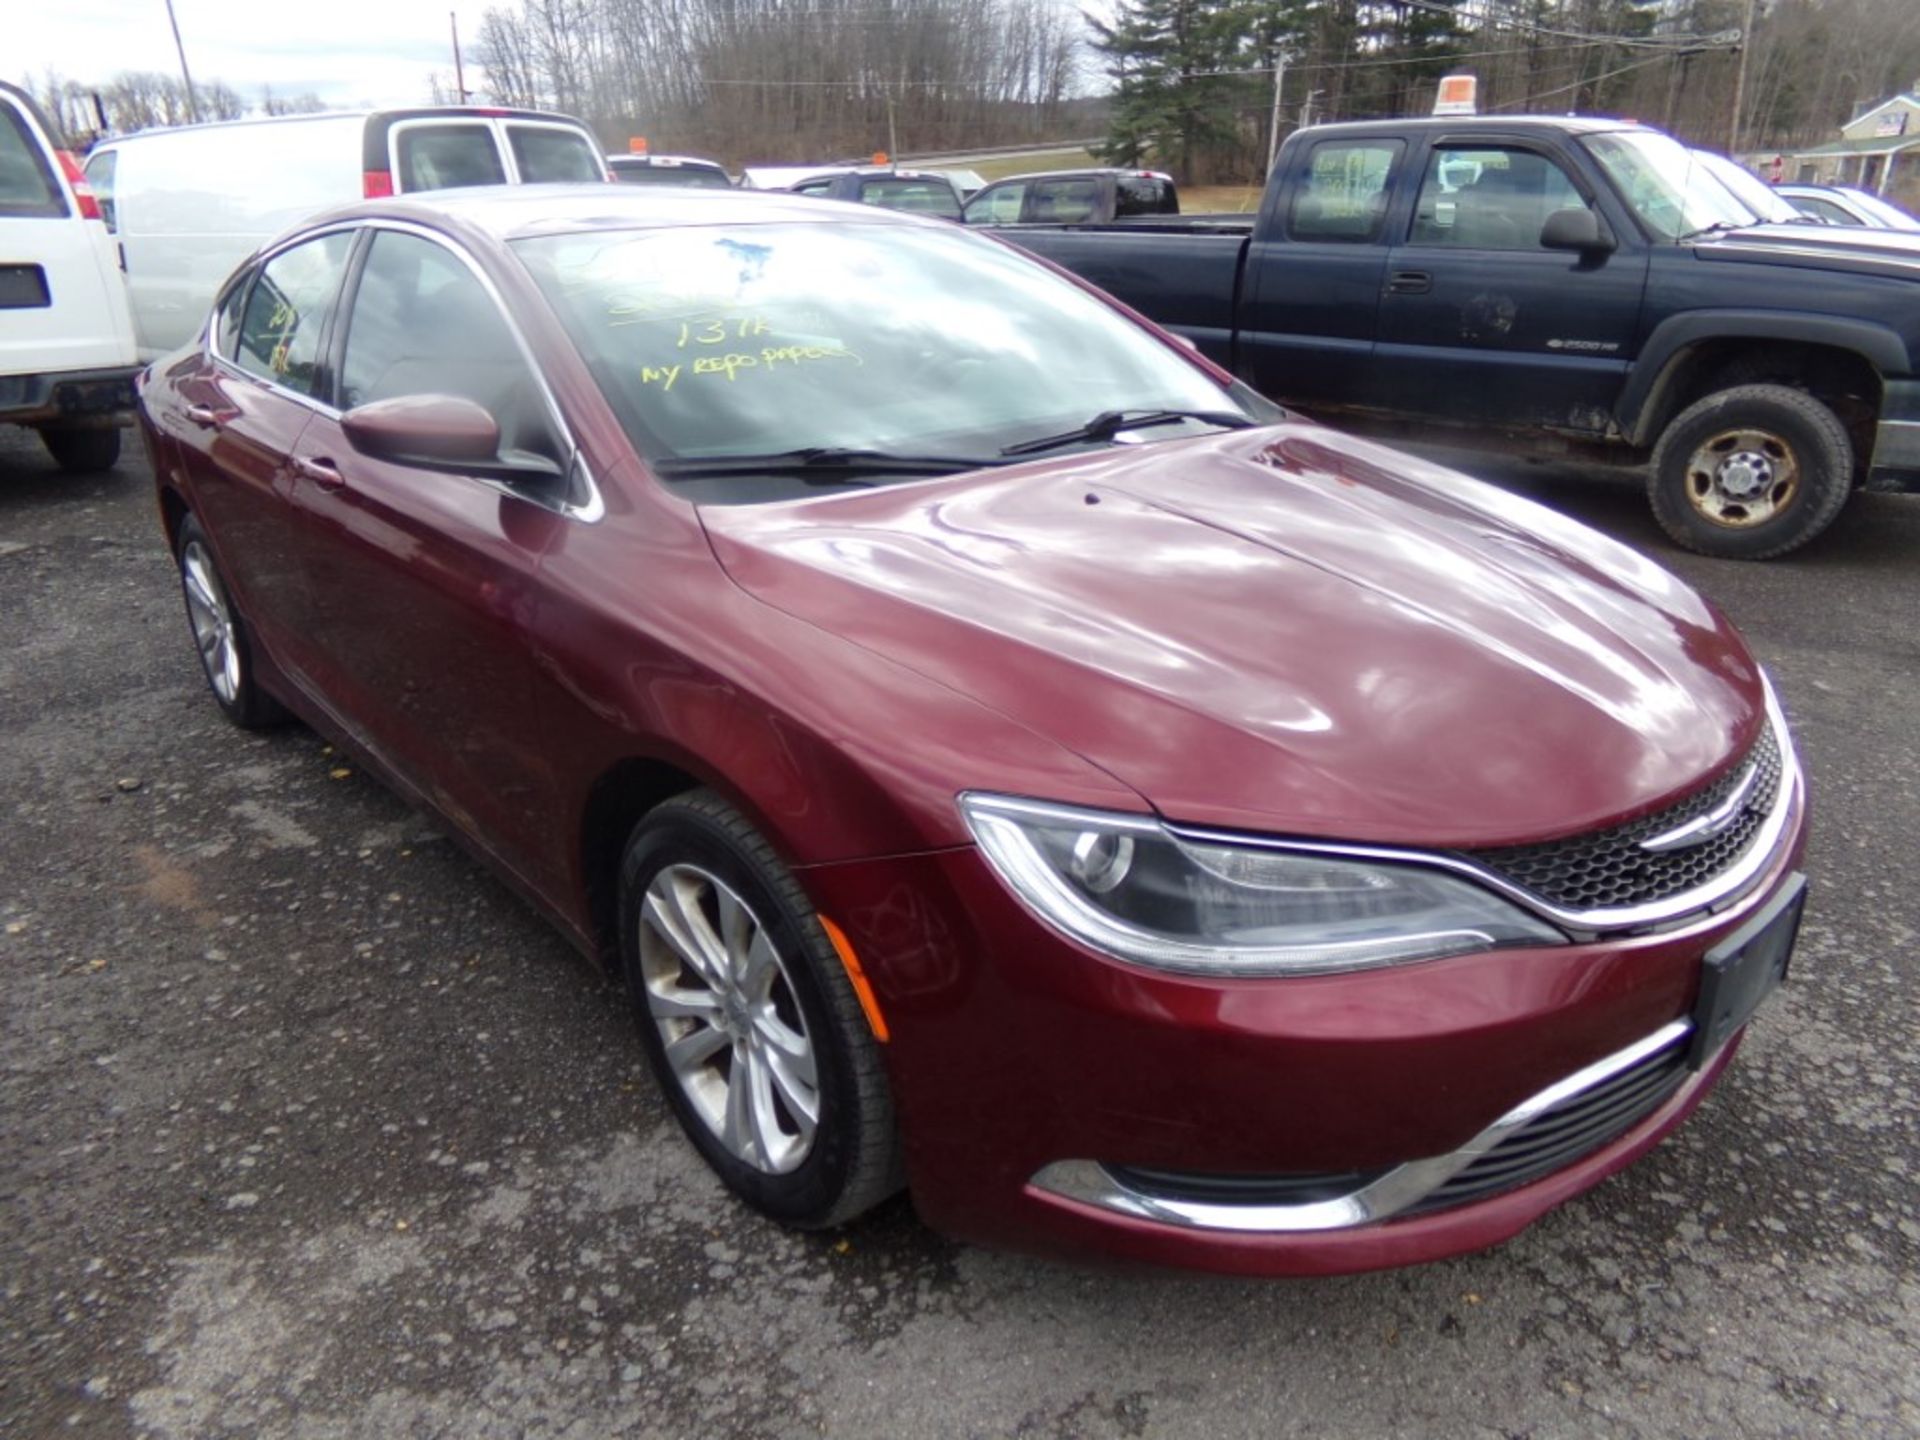 2015 Chrysler 200 Limited, Maroon, 137,543 Miles, VIN# 1C3CCCAB0FN591551, FRONT BUMPER COVER HAS - Image 4 of 8